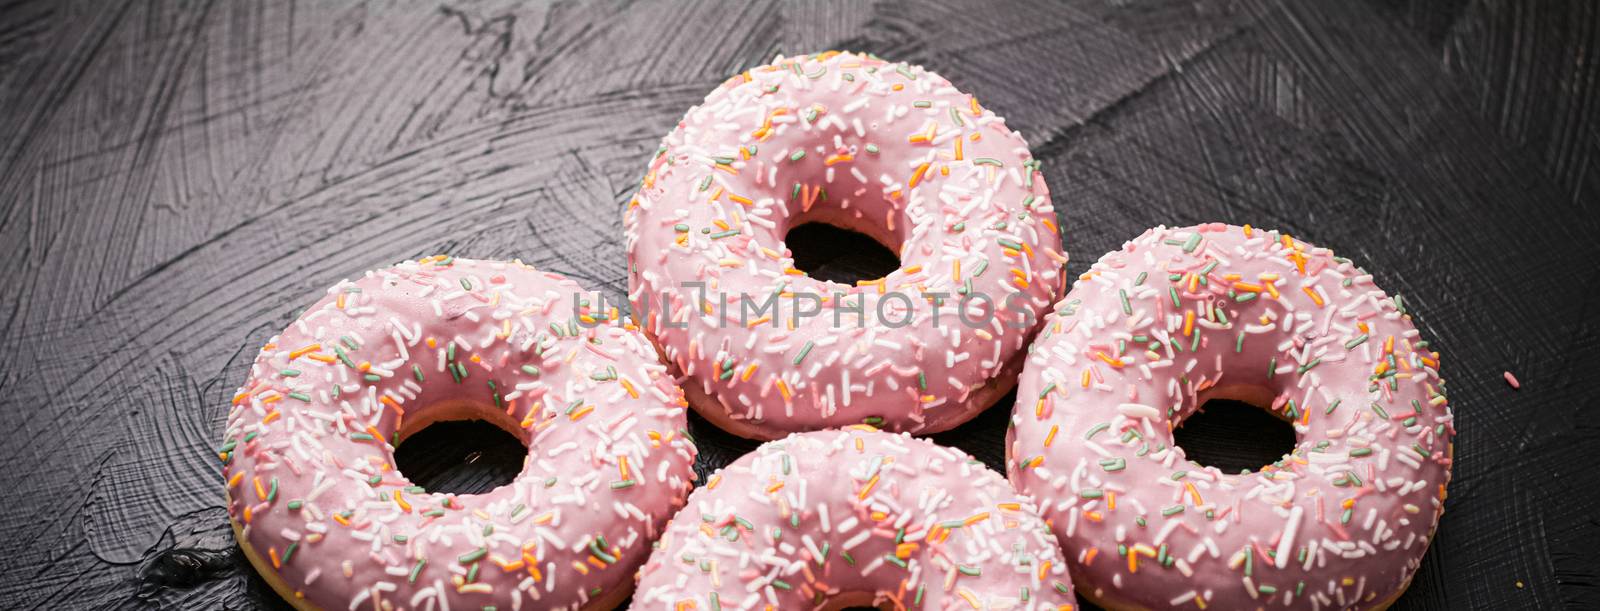 Bakery, branding and cafe concept - Frosted sprinkled donuts, sweet pastry dessert on rustic wooden background, doughnuts as tasty snack, top view food brand flat lay for blog, menu or cookbook design